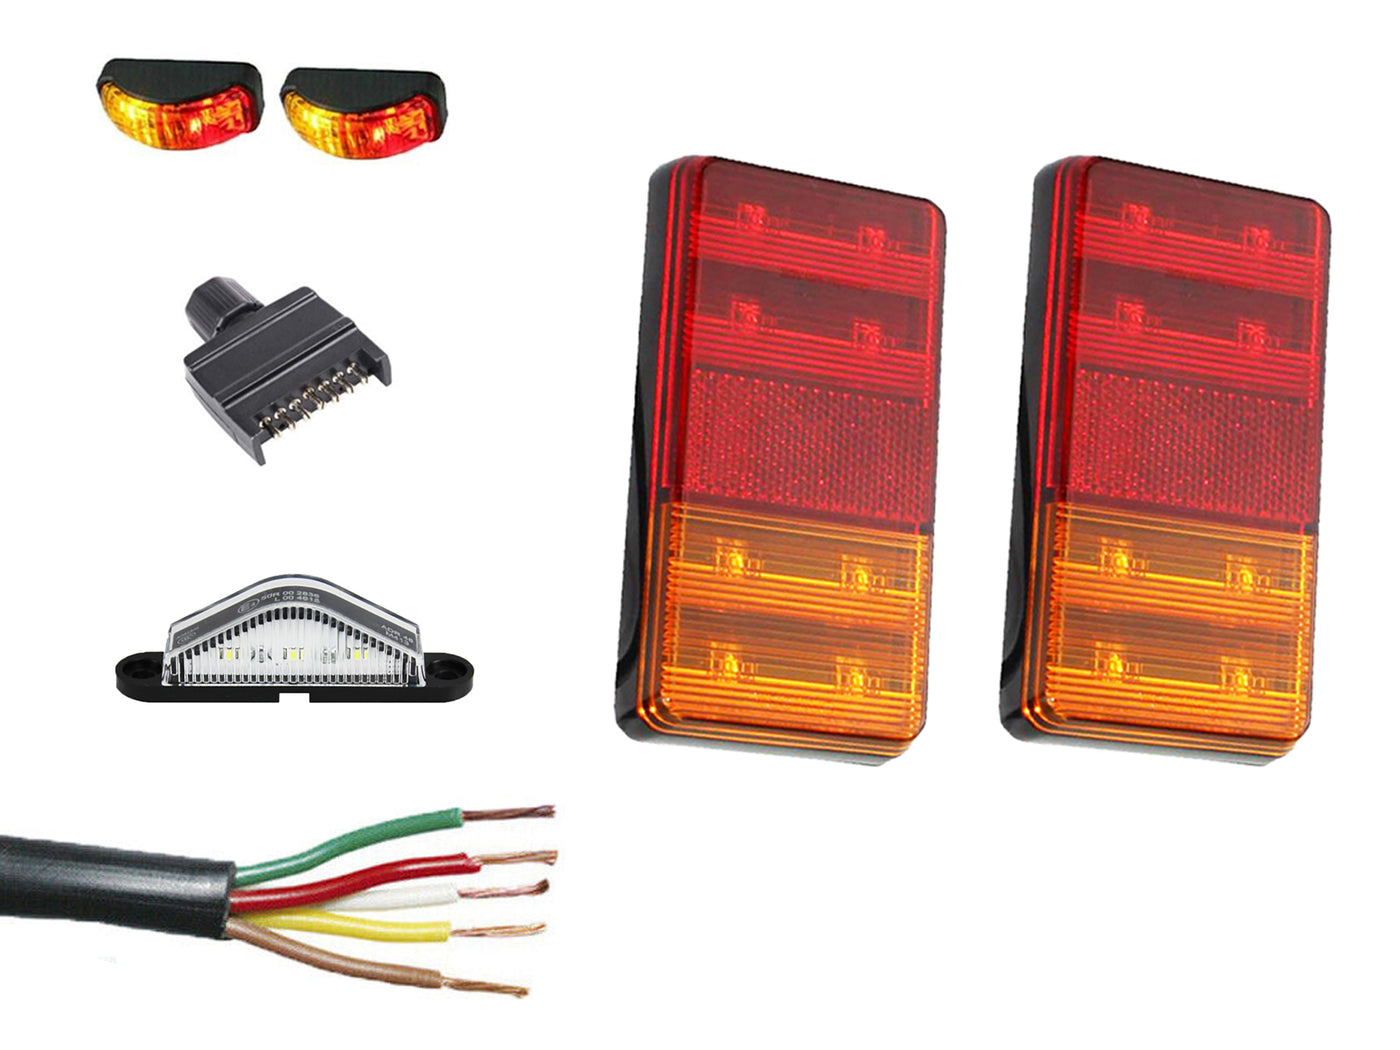 Led Trailer Light Kit Plug, Number Plate Light, 5 Core Wire Cable, Side Markers